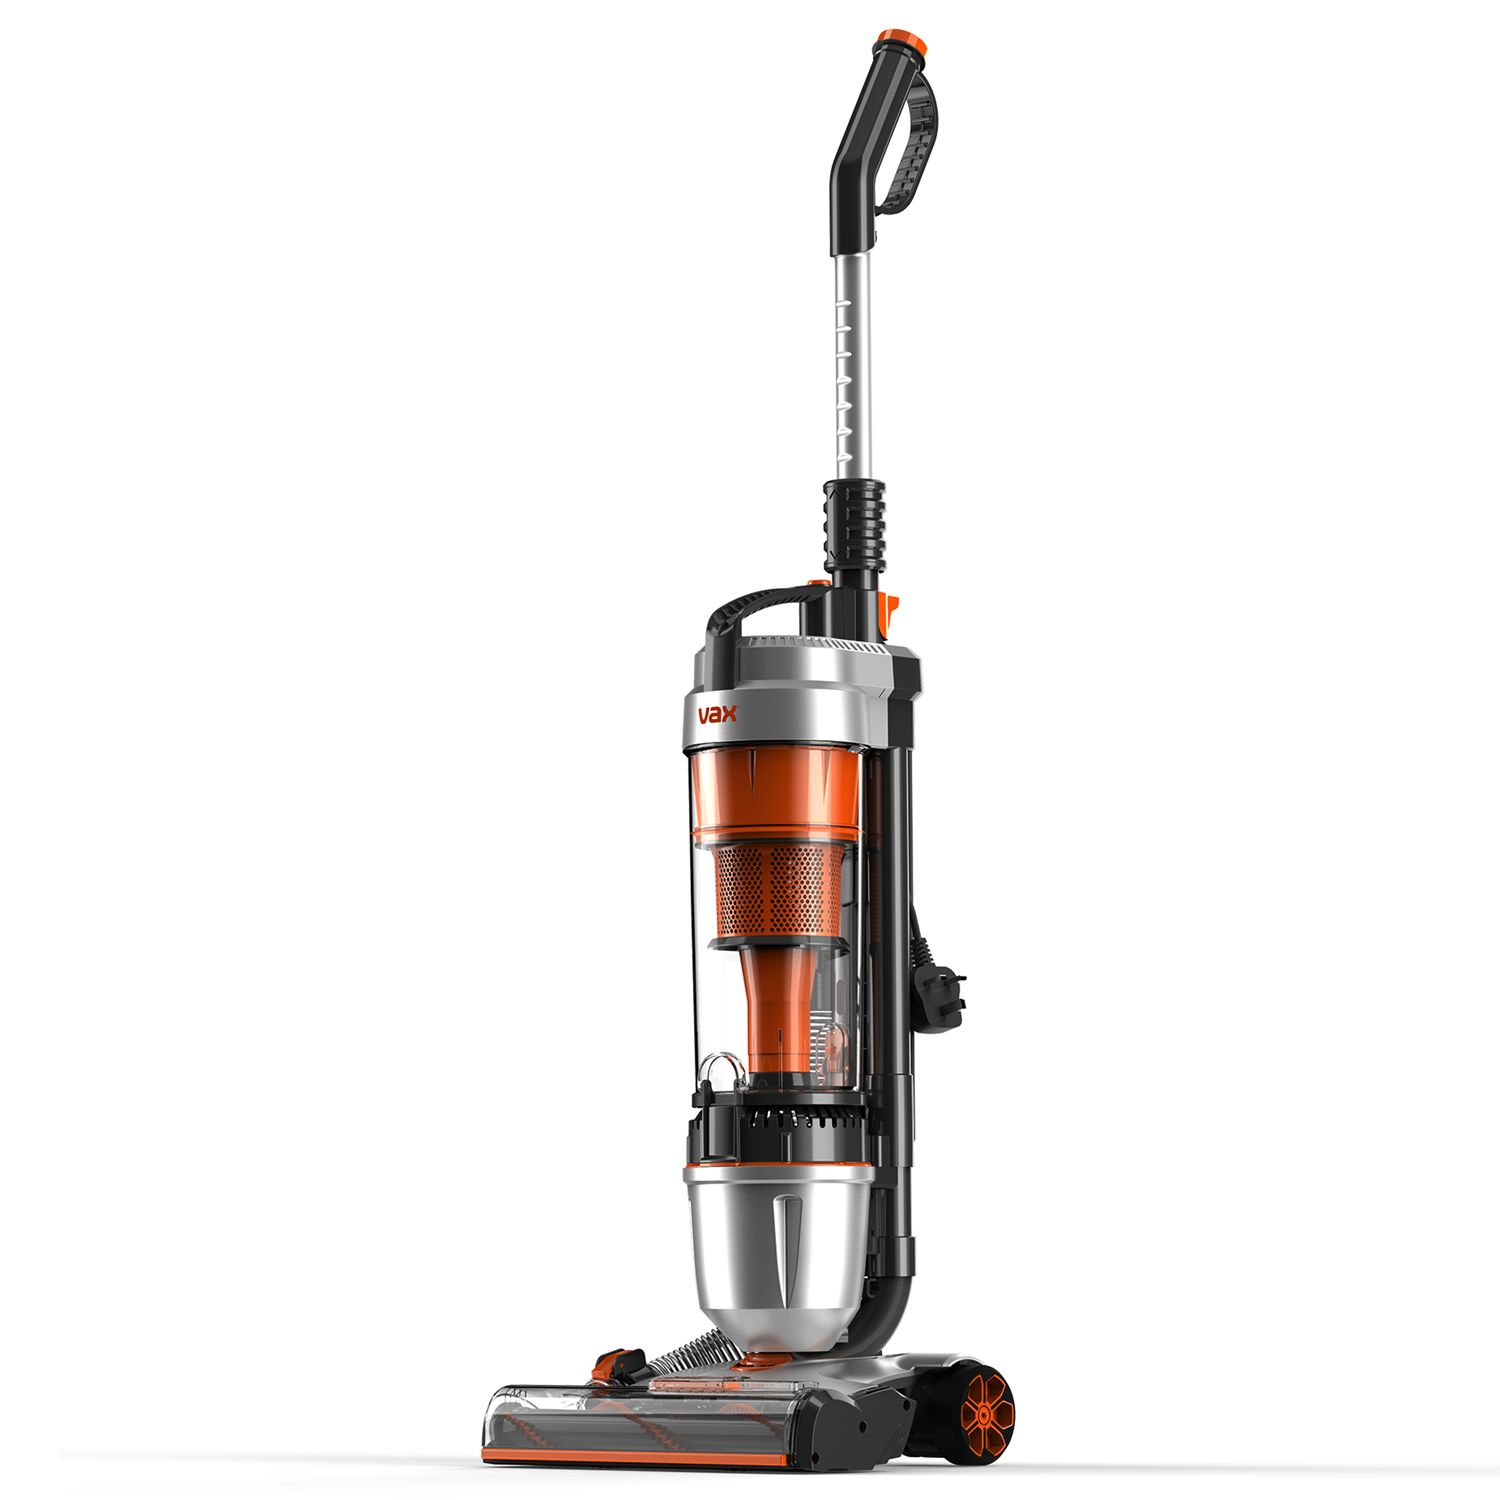 What to look for in a good Vax Vacuum Cleaner?